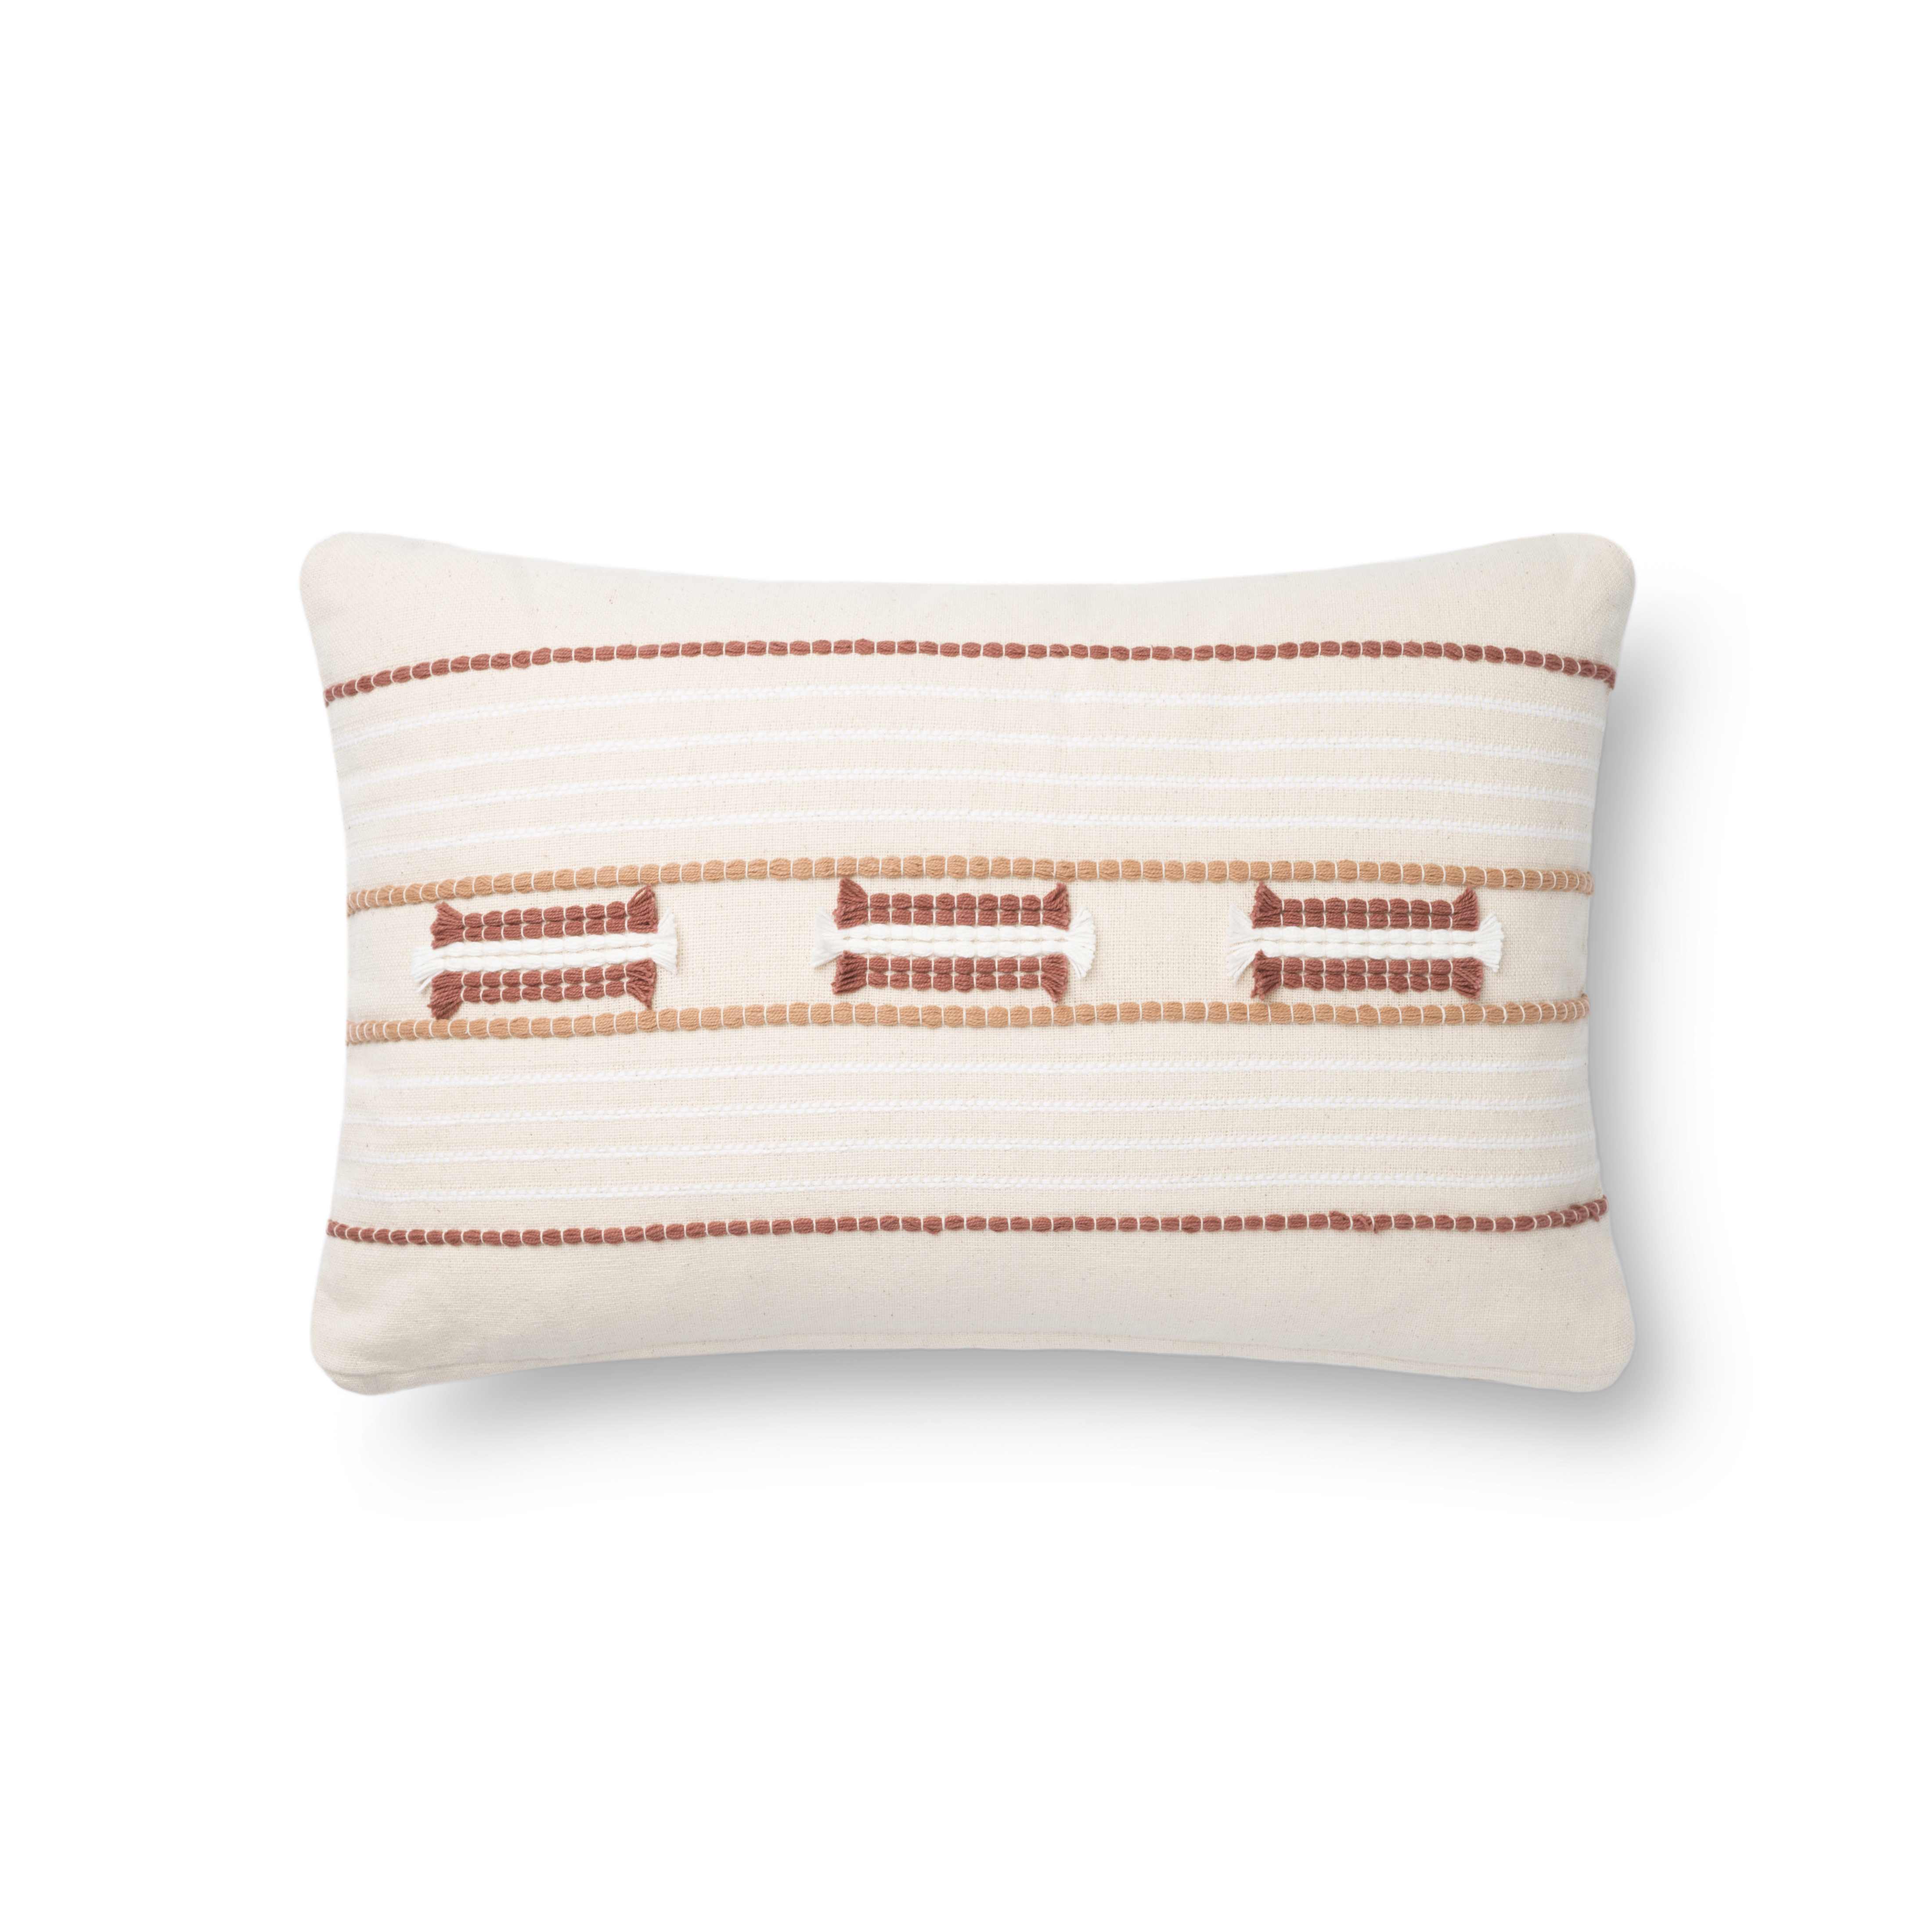 Magnolia Home by Joanna Gaines PILLOWS P1141 NATURAL / SPICE 13" x 21" Cover Only - Image 0